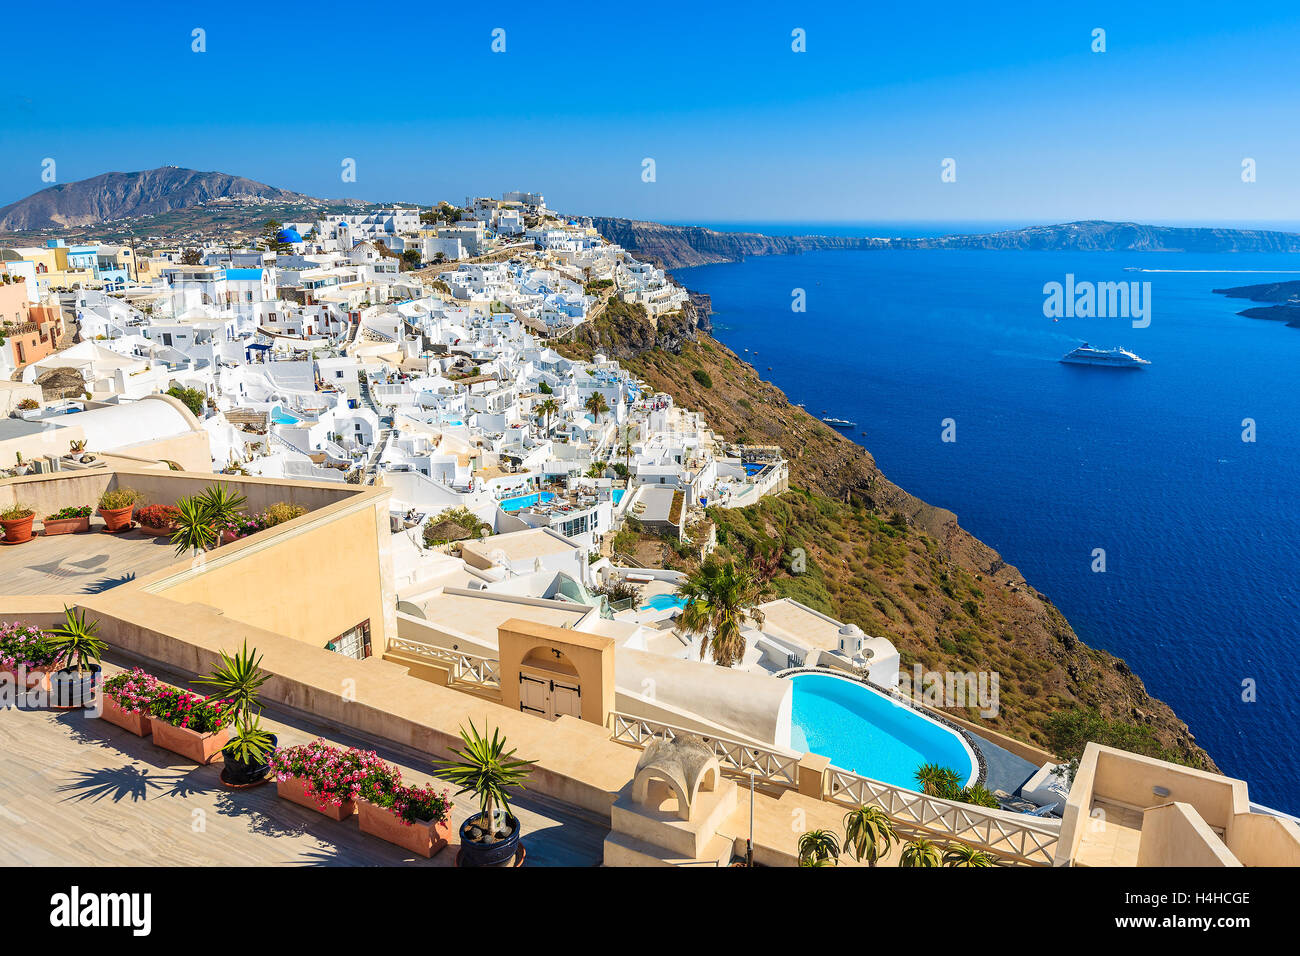 View of Firostefani village with sea in background at sunset time, Santorini island, Greece Stock Photo